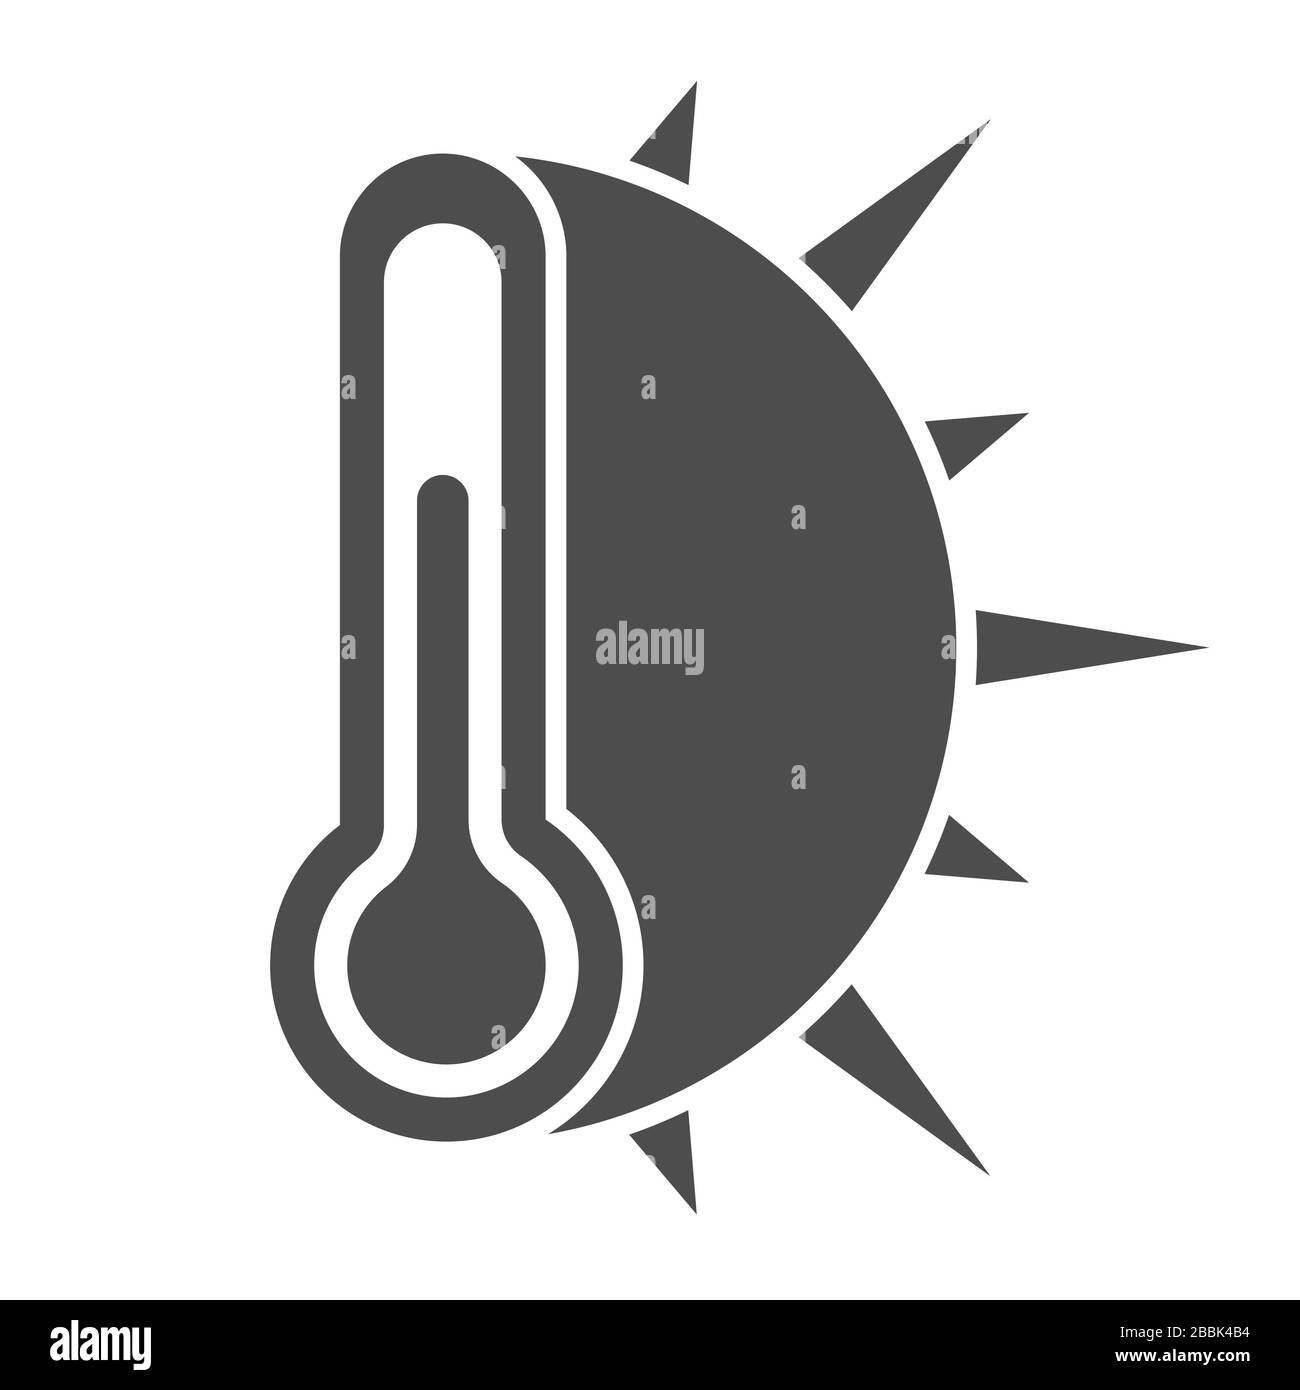 https://c8.alamy.com/comp/2BBK4B4/icon-of-a-thermometer-with-the-sunwarm-weather-simple-flat-vector-stock-illustration-2BBK4B4.jpg